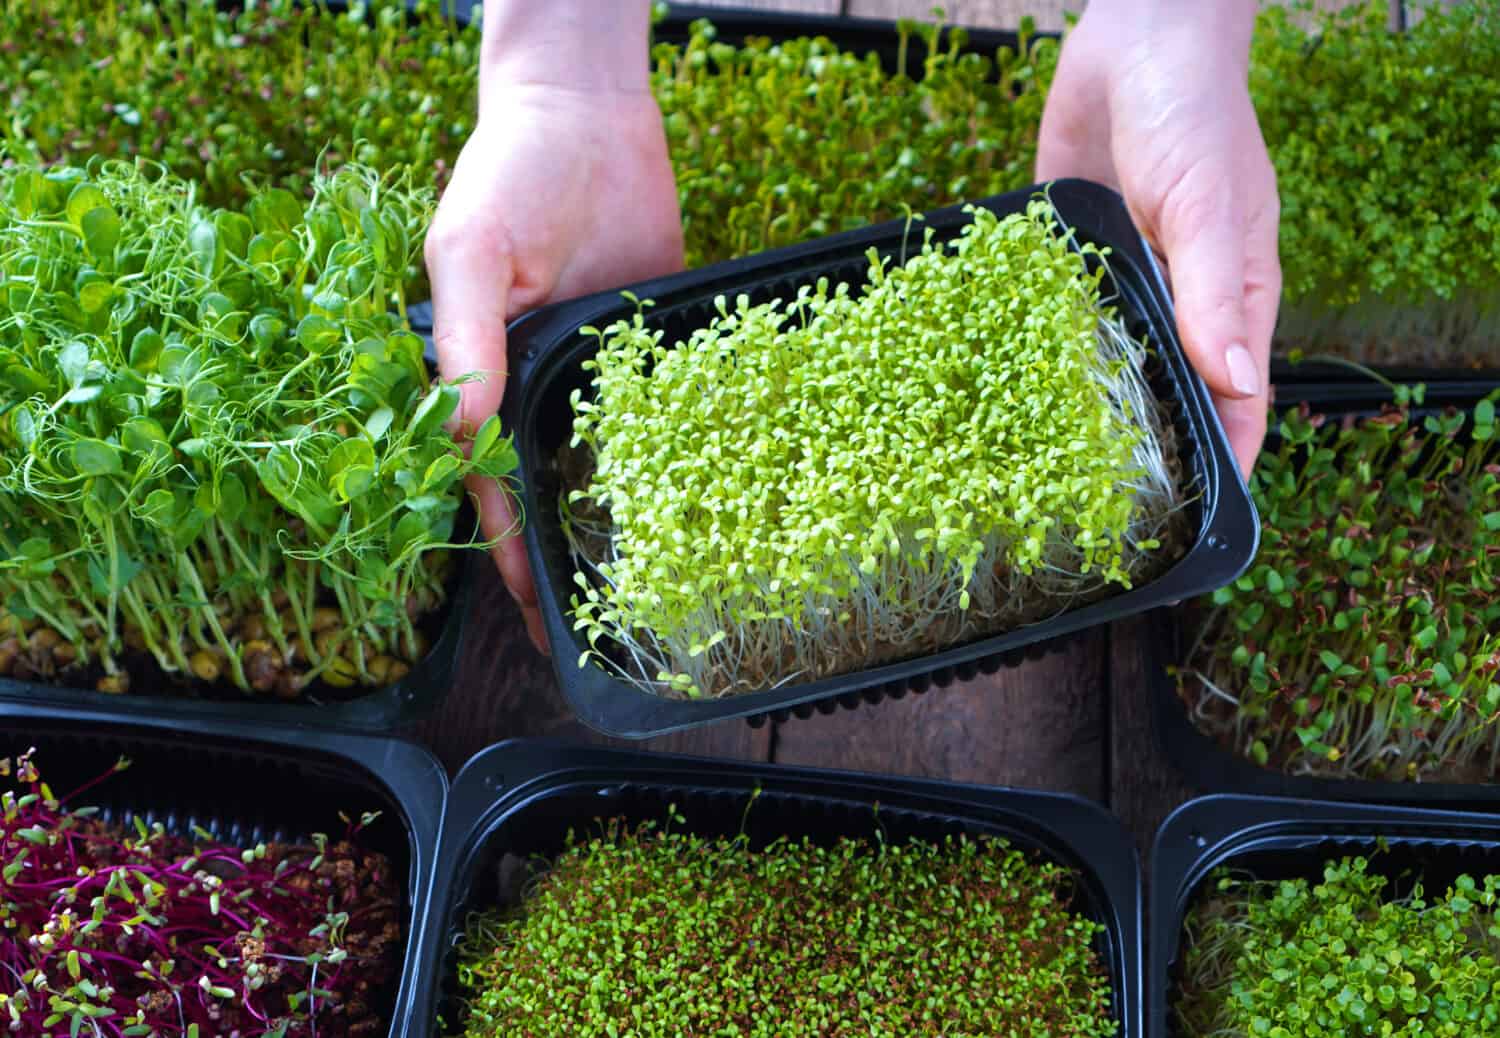 Microgreens growing background with microgreen sprouts in female hands